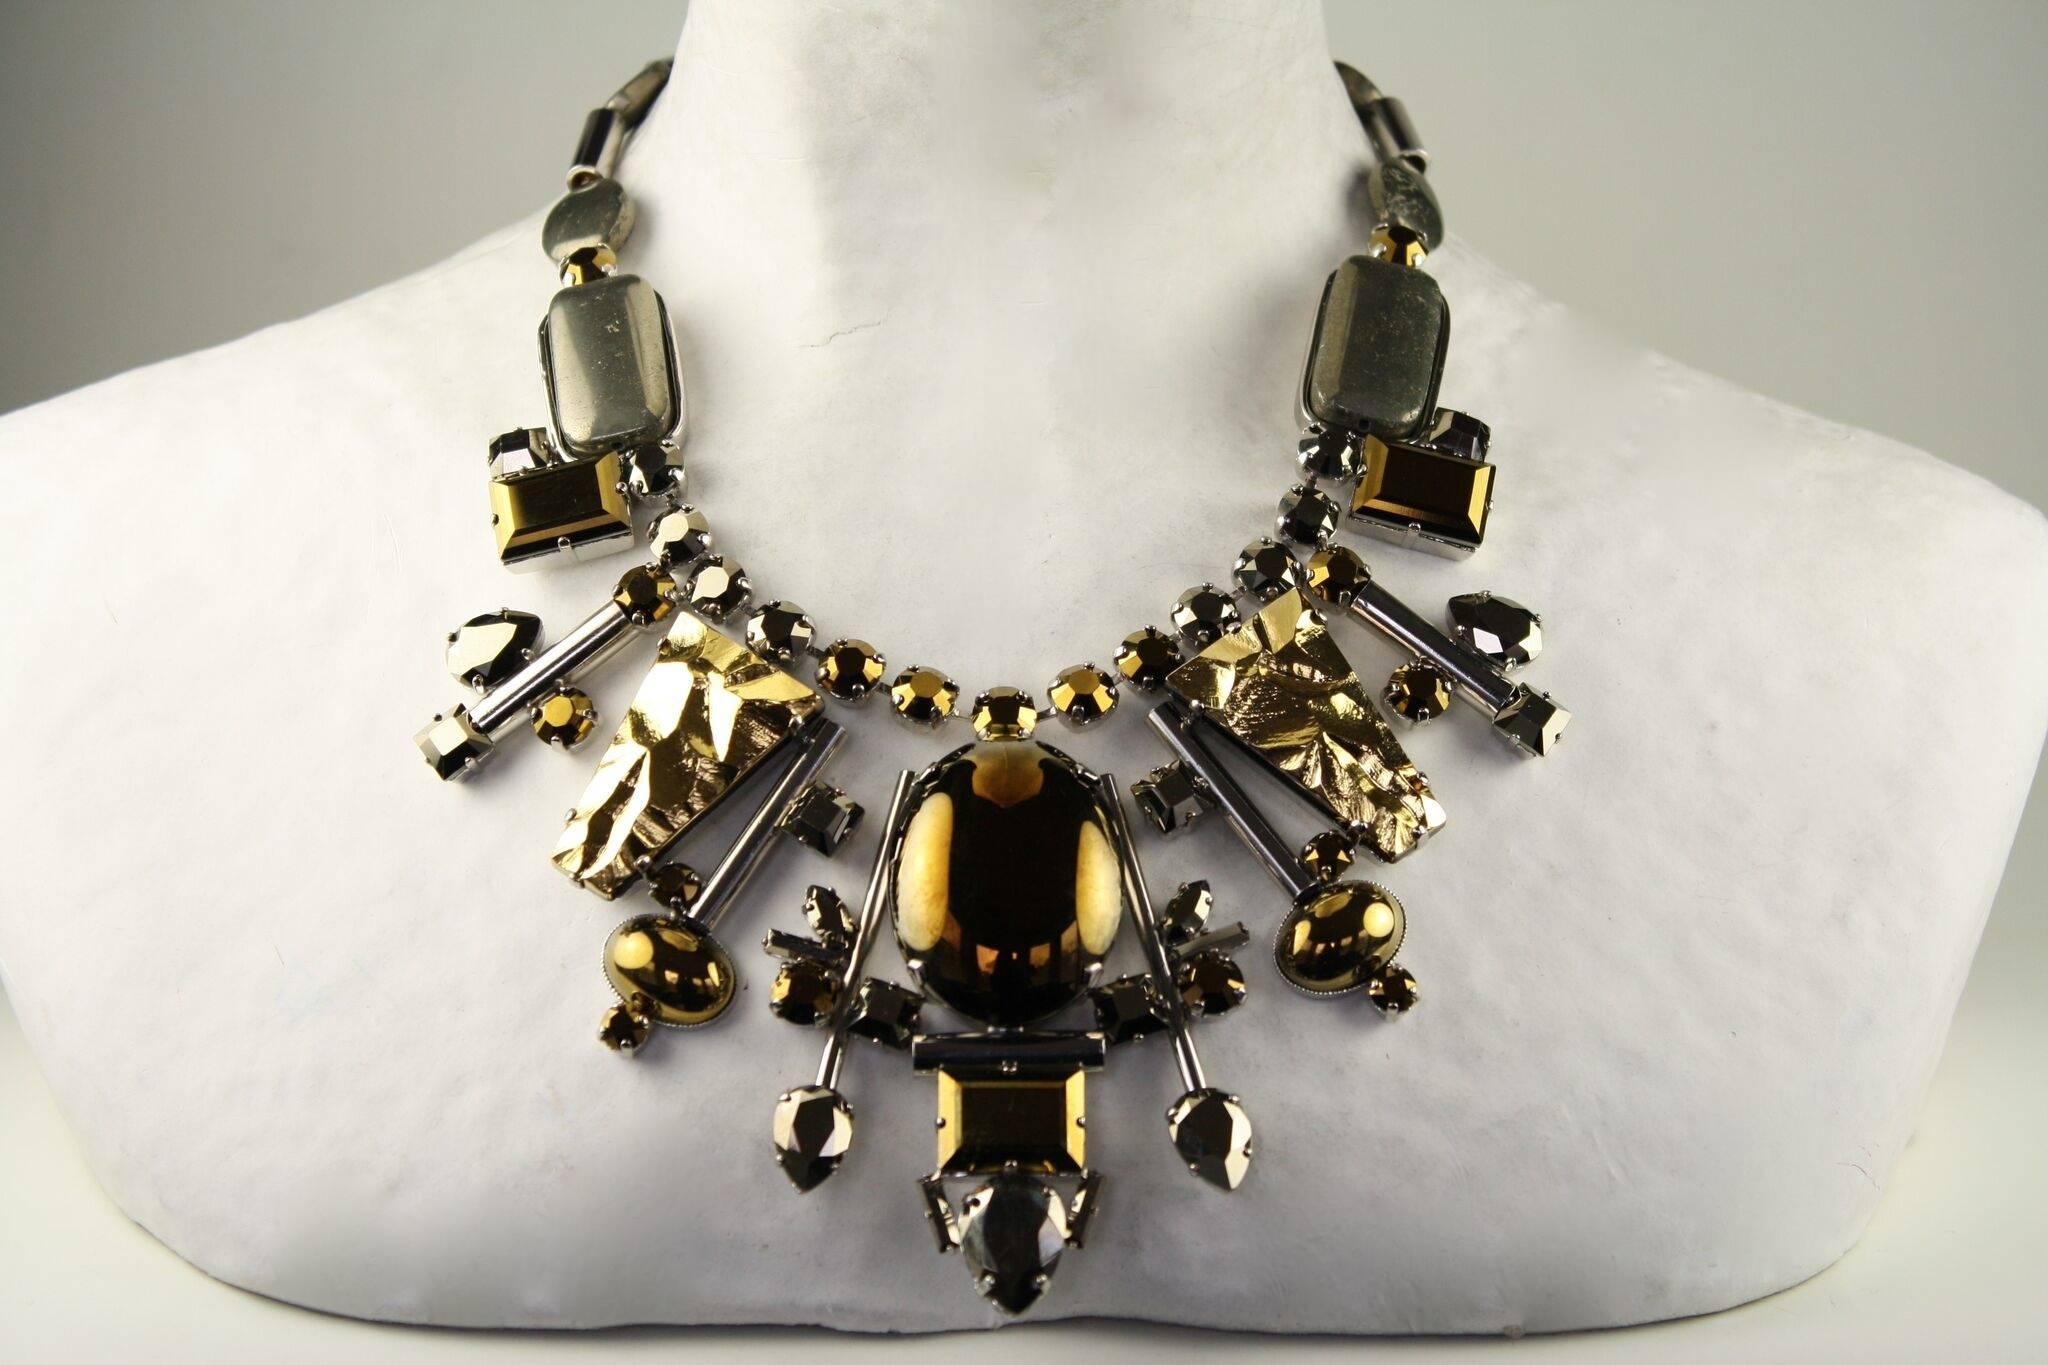 Pyrite, handmade glass cabochons, gold and silver metallic treatment necklace from Philippe Ferrandis' spring 2016 collection. 

15